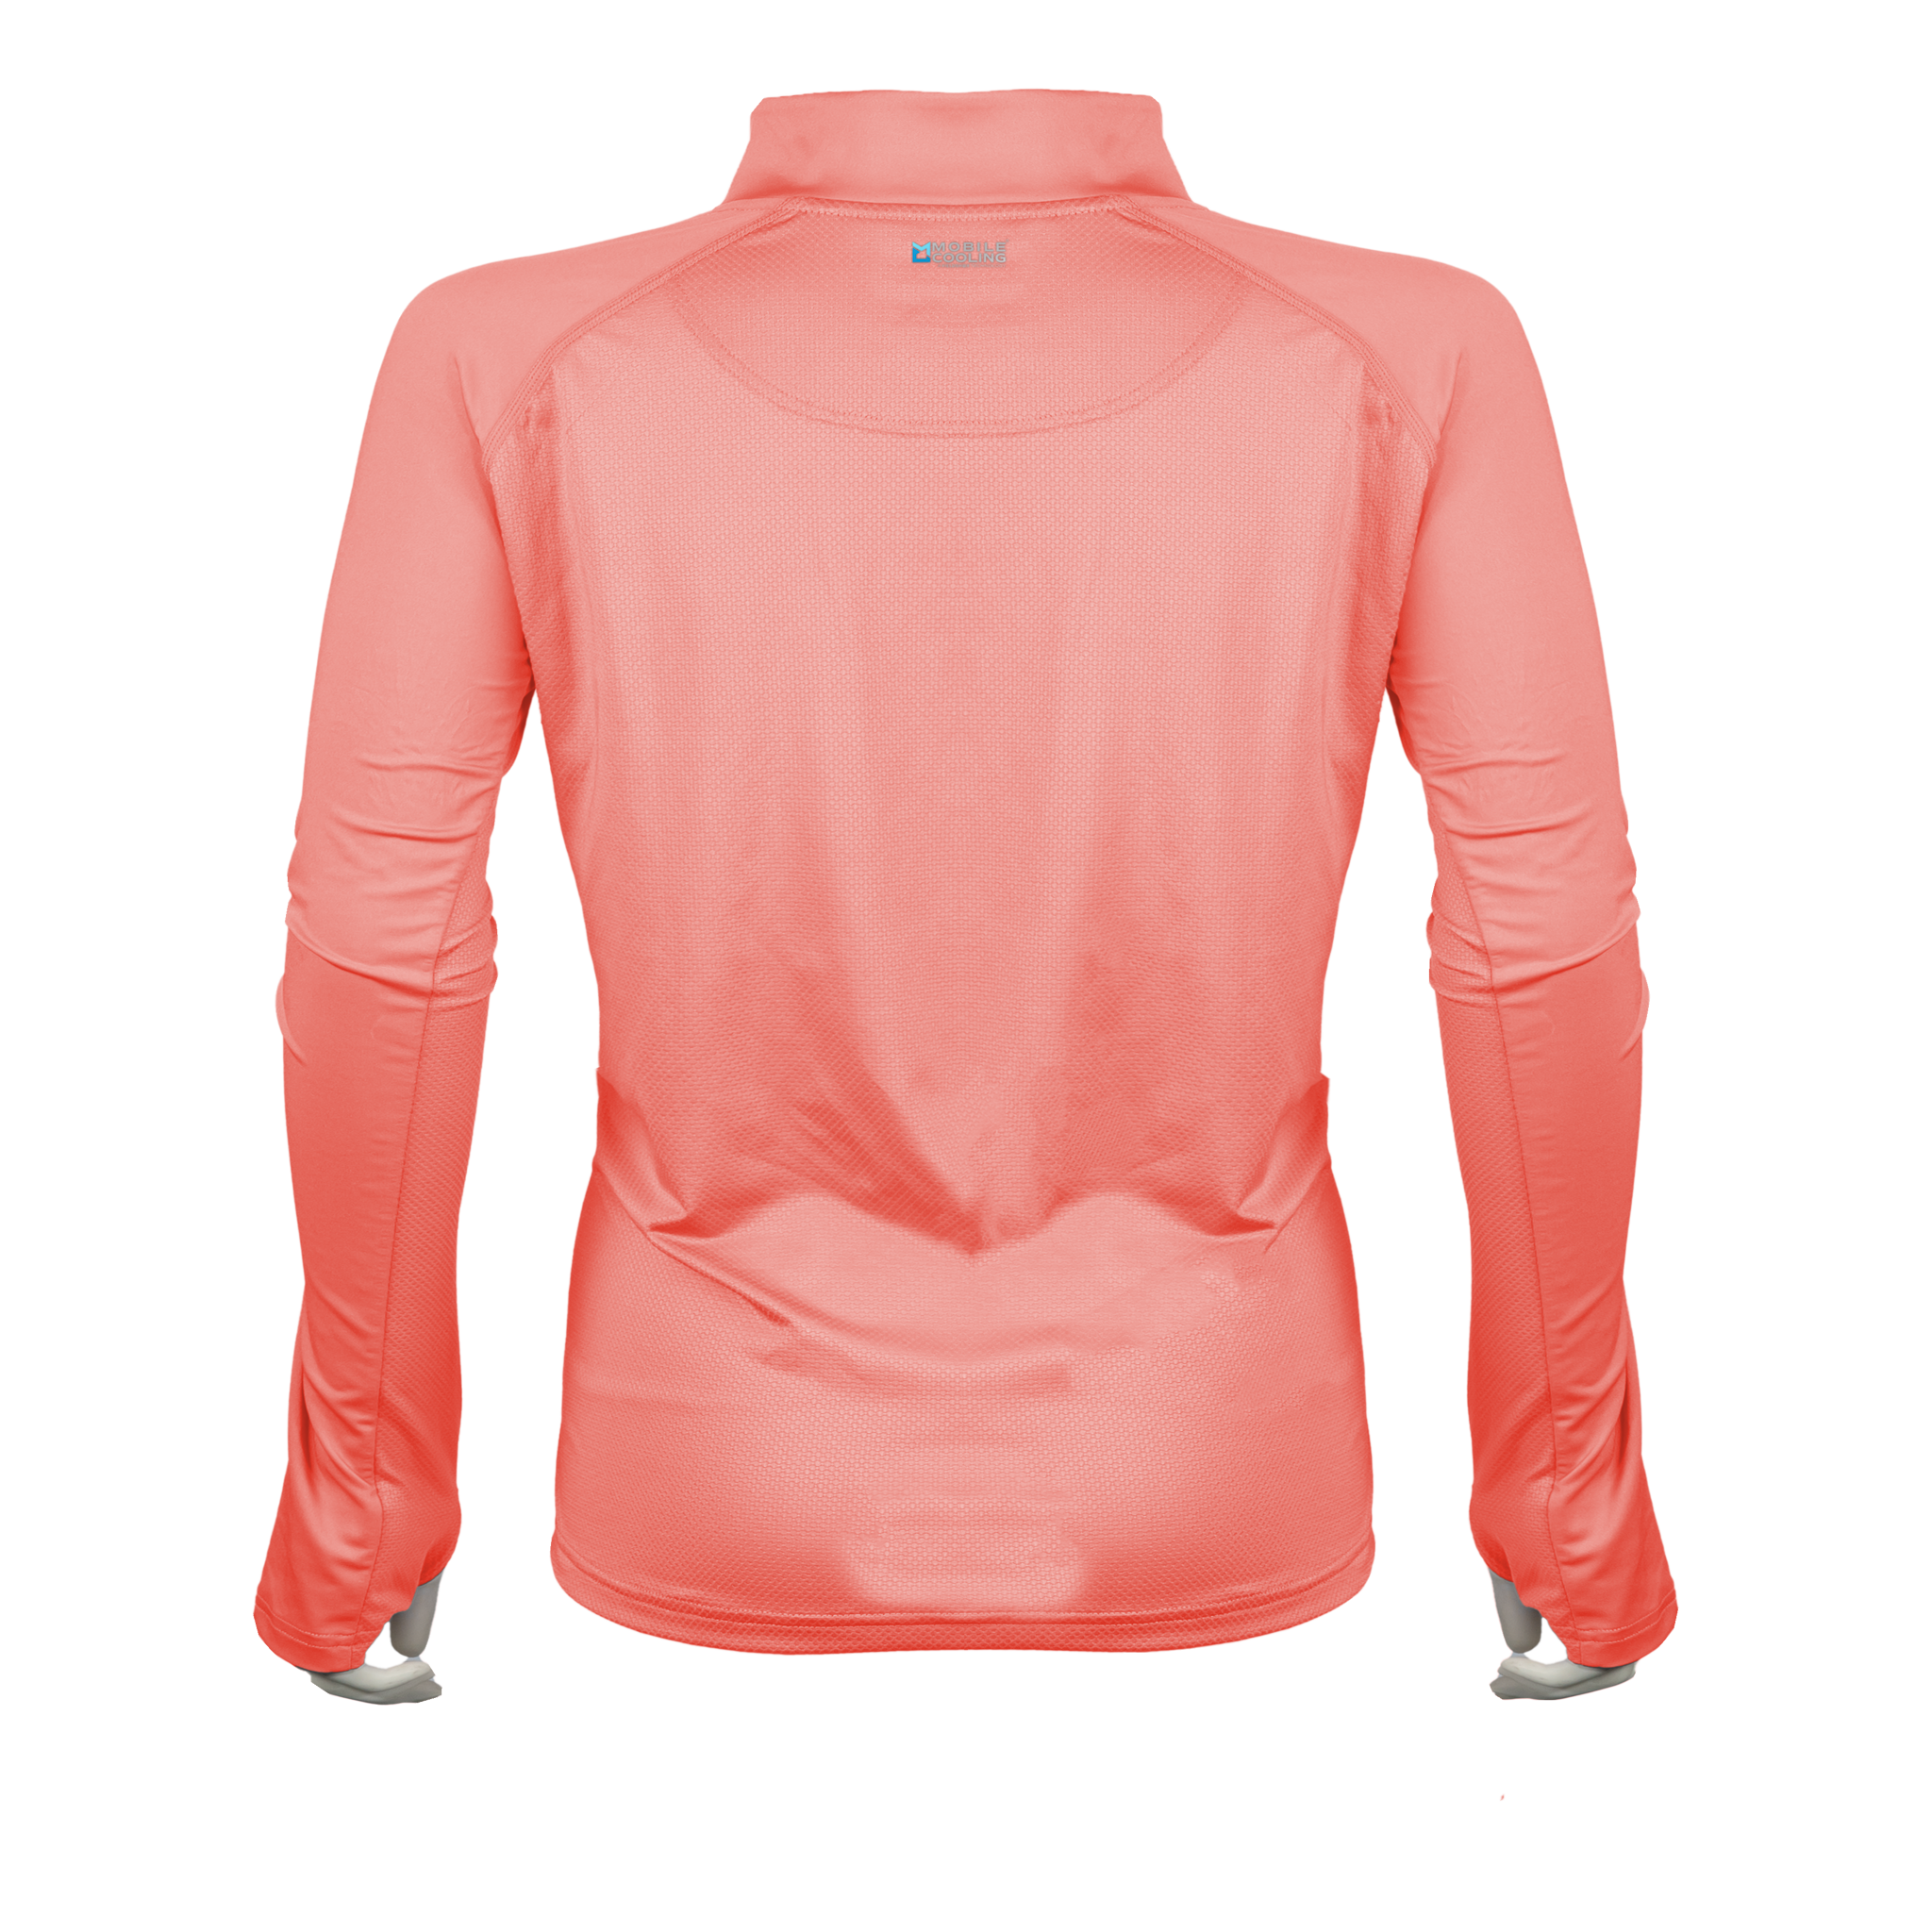 UNDER Armour Women's V-Neck Vented Long Sleeve Tee Pink and White